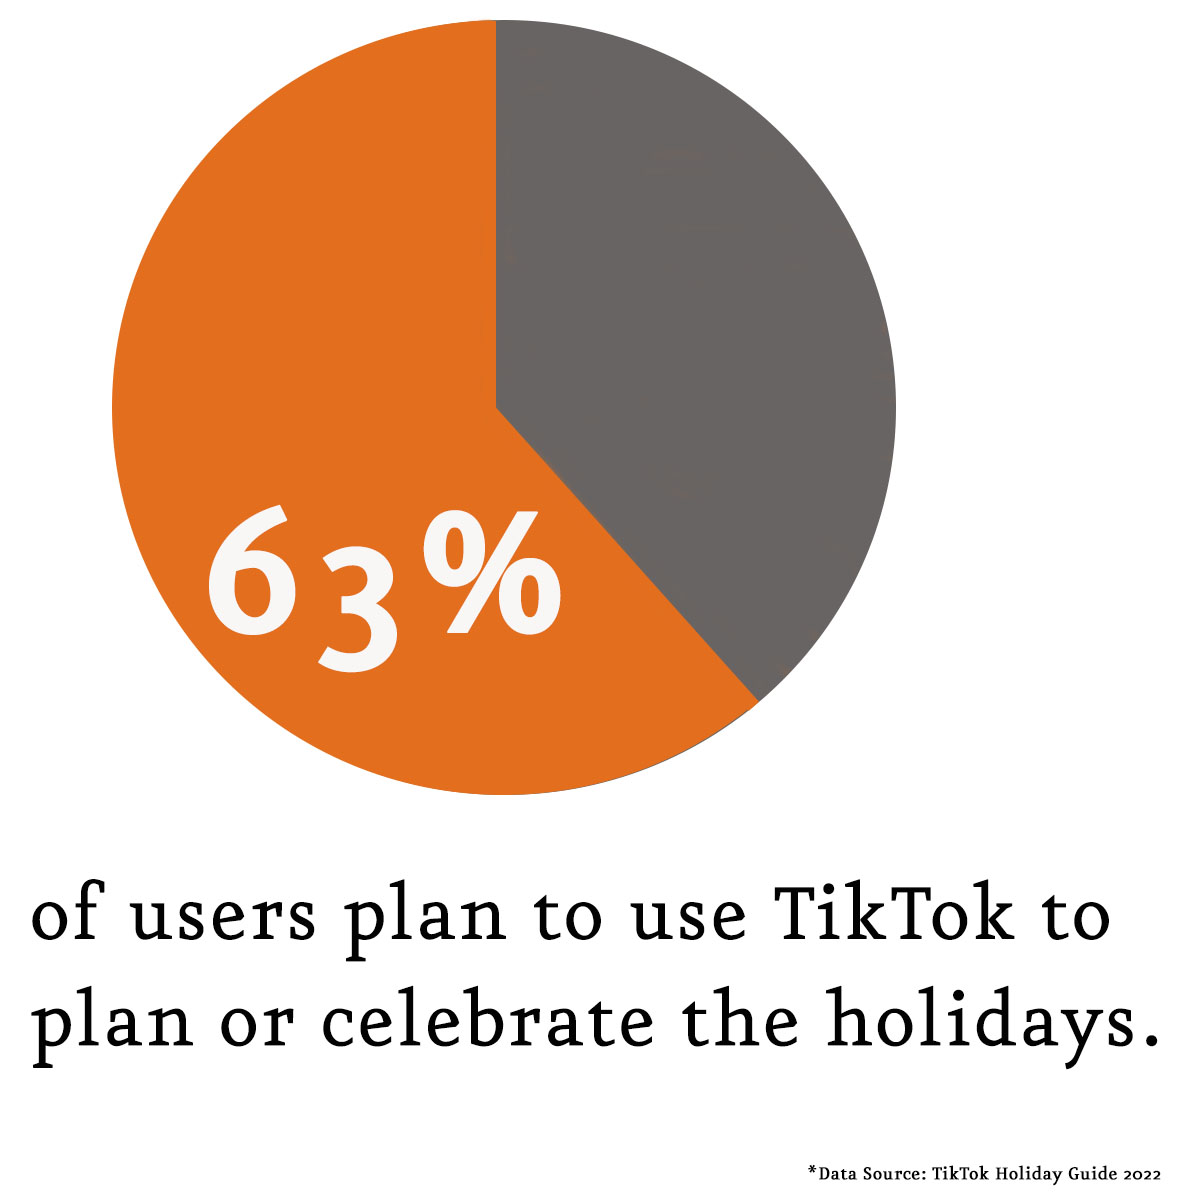 Orange and gray pie graph illustrating the 63% of TikTok users that plan to use the app for planning or celebrating the holidays.